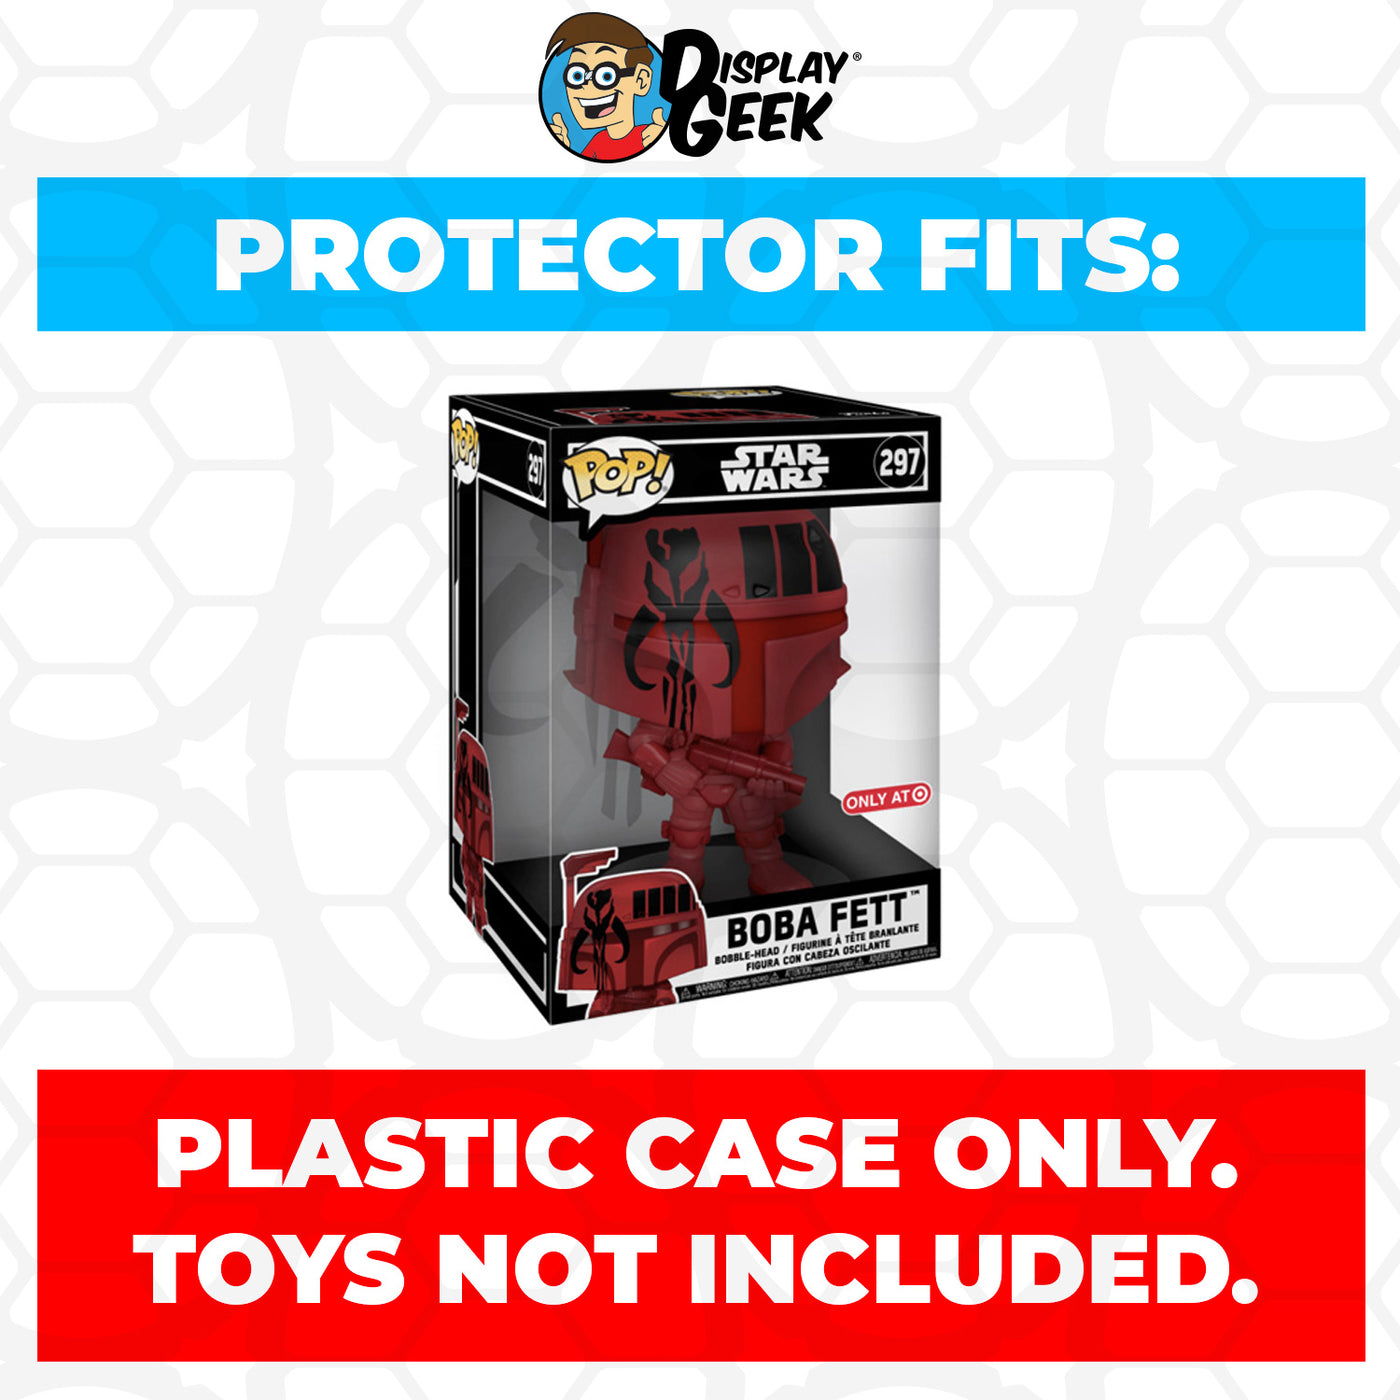 Pop Protector for 10 inch Boba Fett Futura Red #297 Jumbo Funko Pop on The Protector Guide App by Display Geek